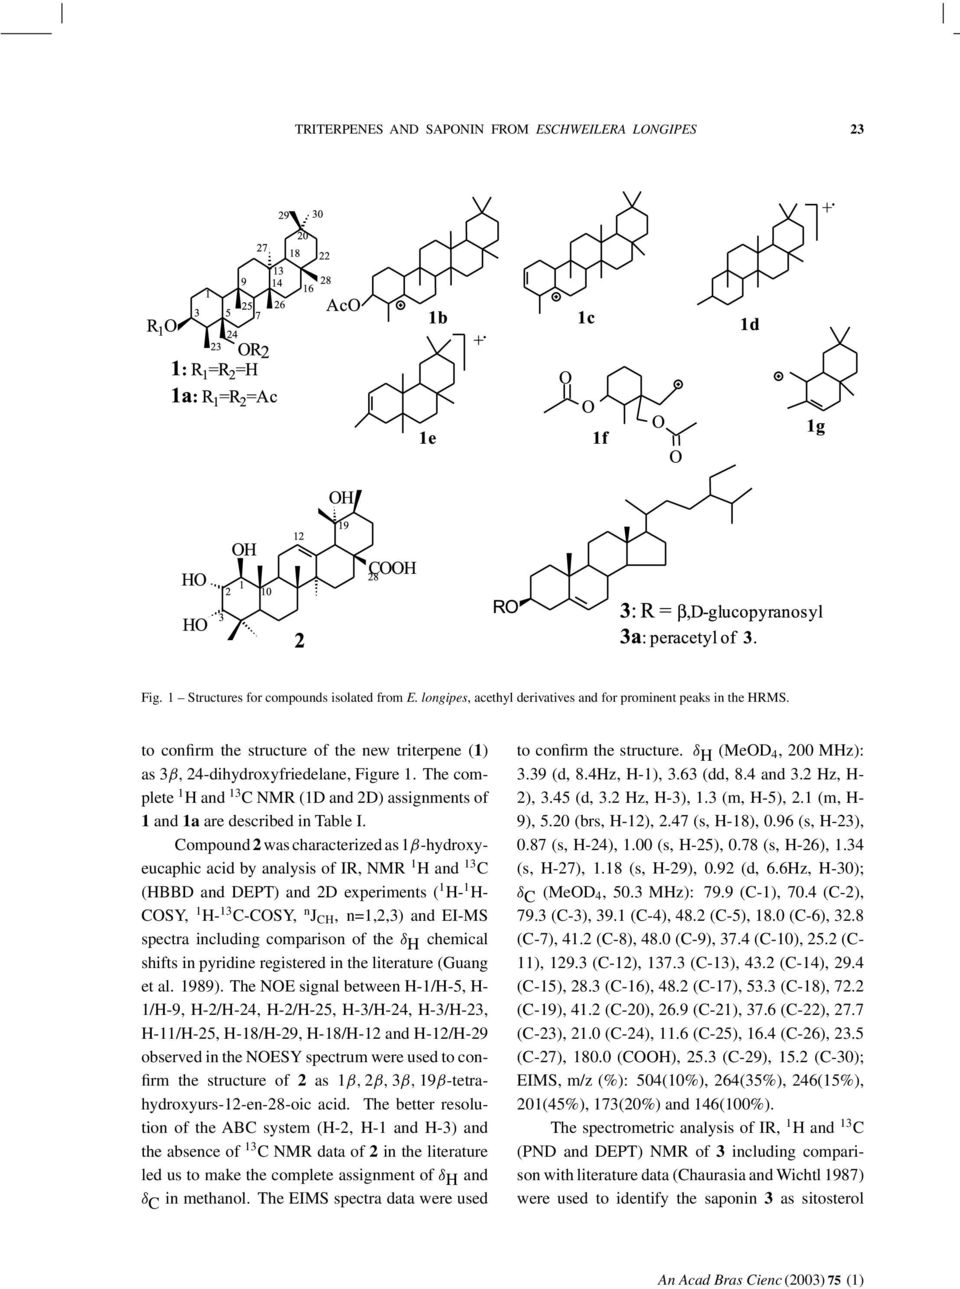 Compound 2 was characterized as 1β-hydroxyeucaphic acid by analysis of IR, NMR 1 H and 13 C (HBBD and DEPT) and 2D experiments ( 1 H- 1 H- COSY, 1 H- 13 C-COSY, n J CH, n=1,2,3) and EI-MS spectra